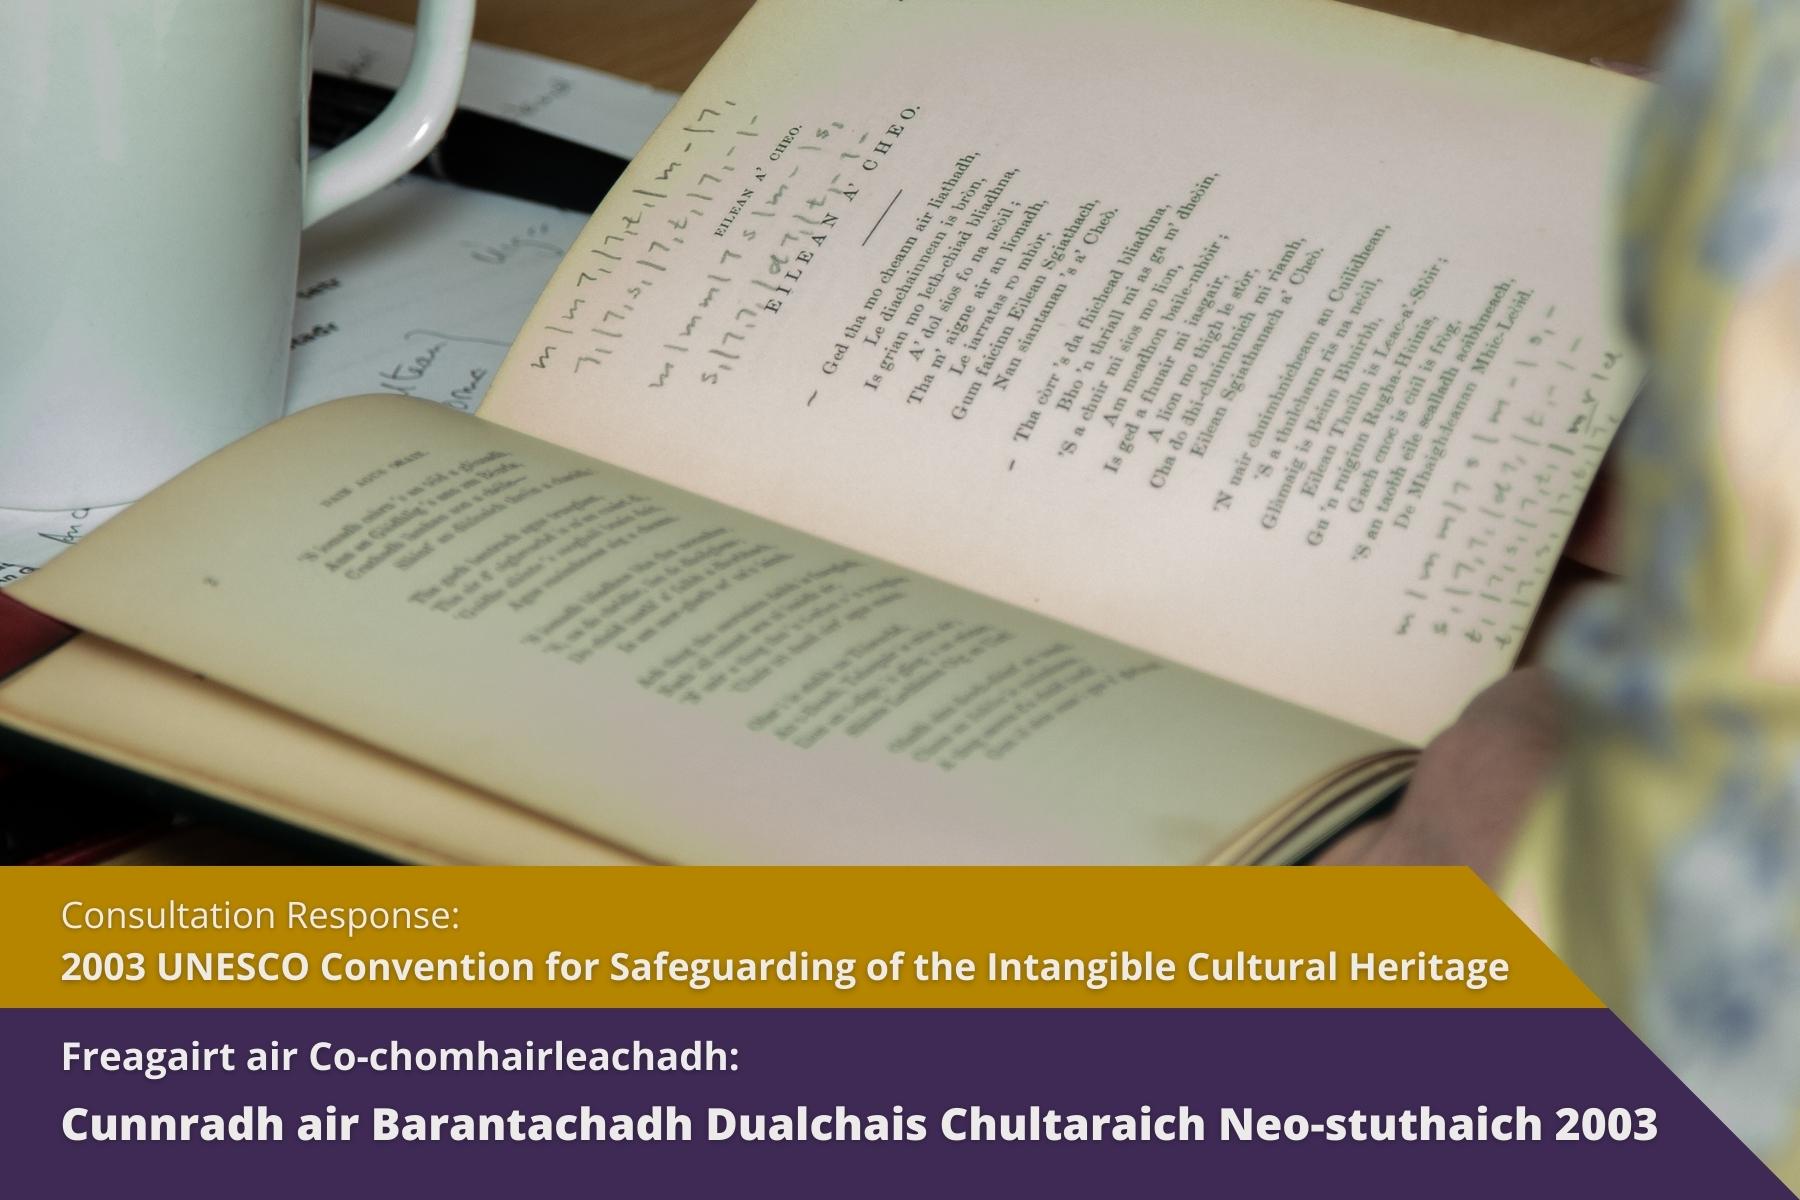 Consultation Response: 2003 UNESCO Convention for Safeguarding of the Intangible Cultural Heritage